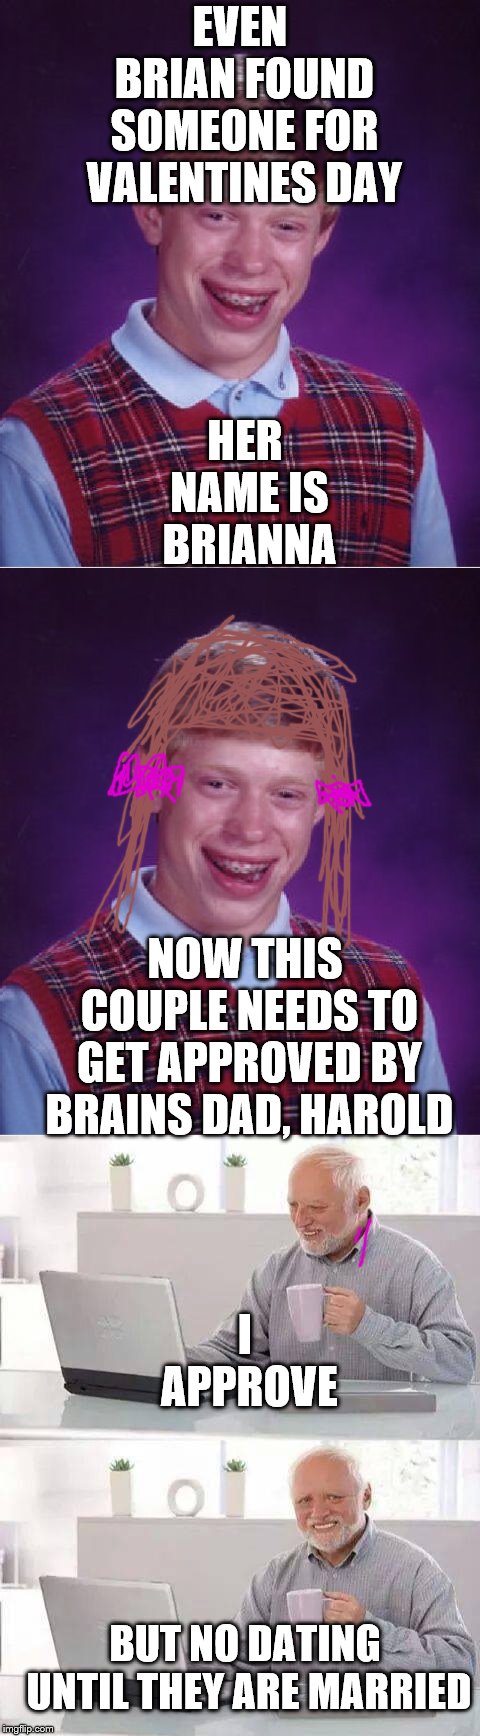 EVEN BRIAN FOUND SOMEONE FOR VALENTINES DAY; HER NAME IS BRIANNA; NOW THIS COUPLE NEEDS TO GET APPROVED BY BRAINS DAD, HAROLD; I APPROVE; BUT NO DATING UNTIL THEY ARE MARRIED | image tagged in memes,bad luck brian,hide the pain harold | made w/ Imgflip meme maker